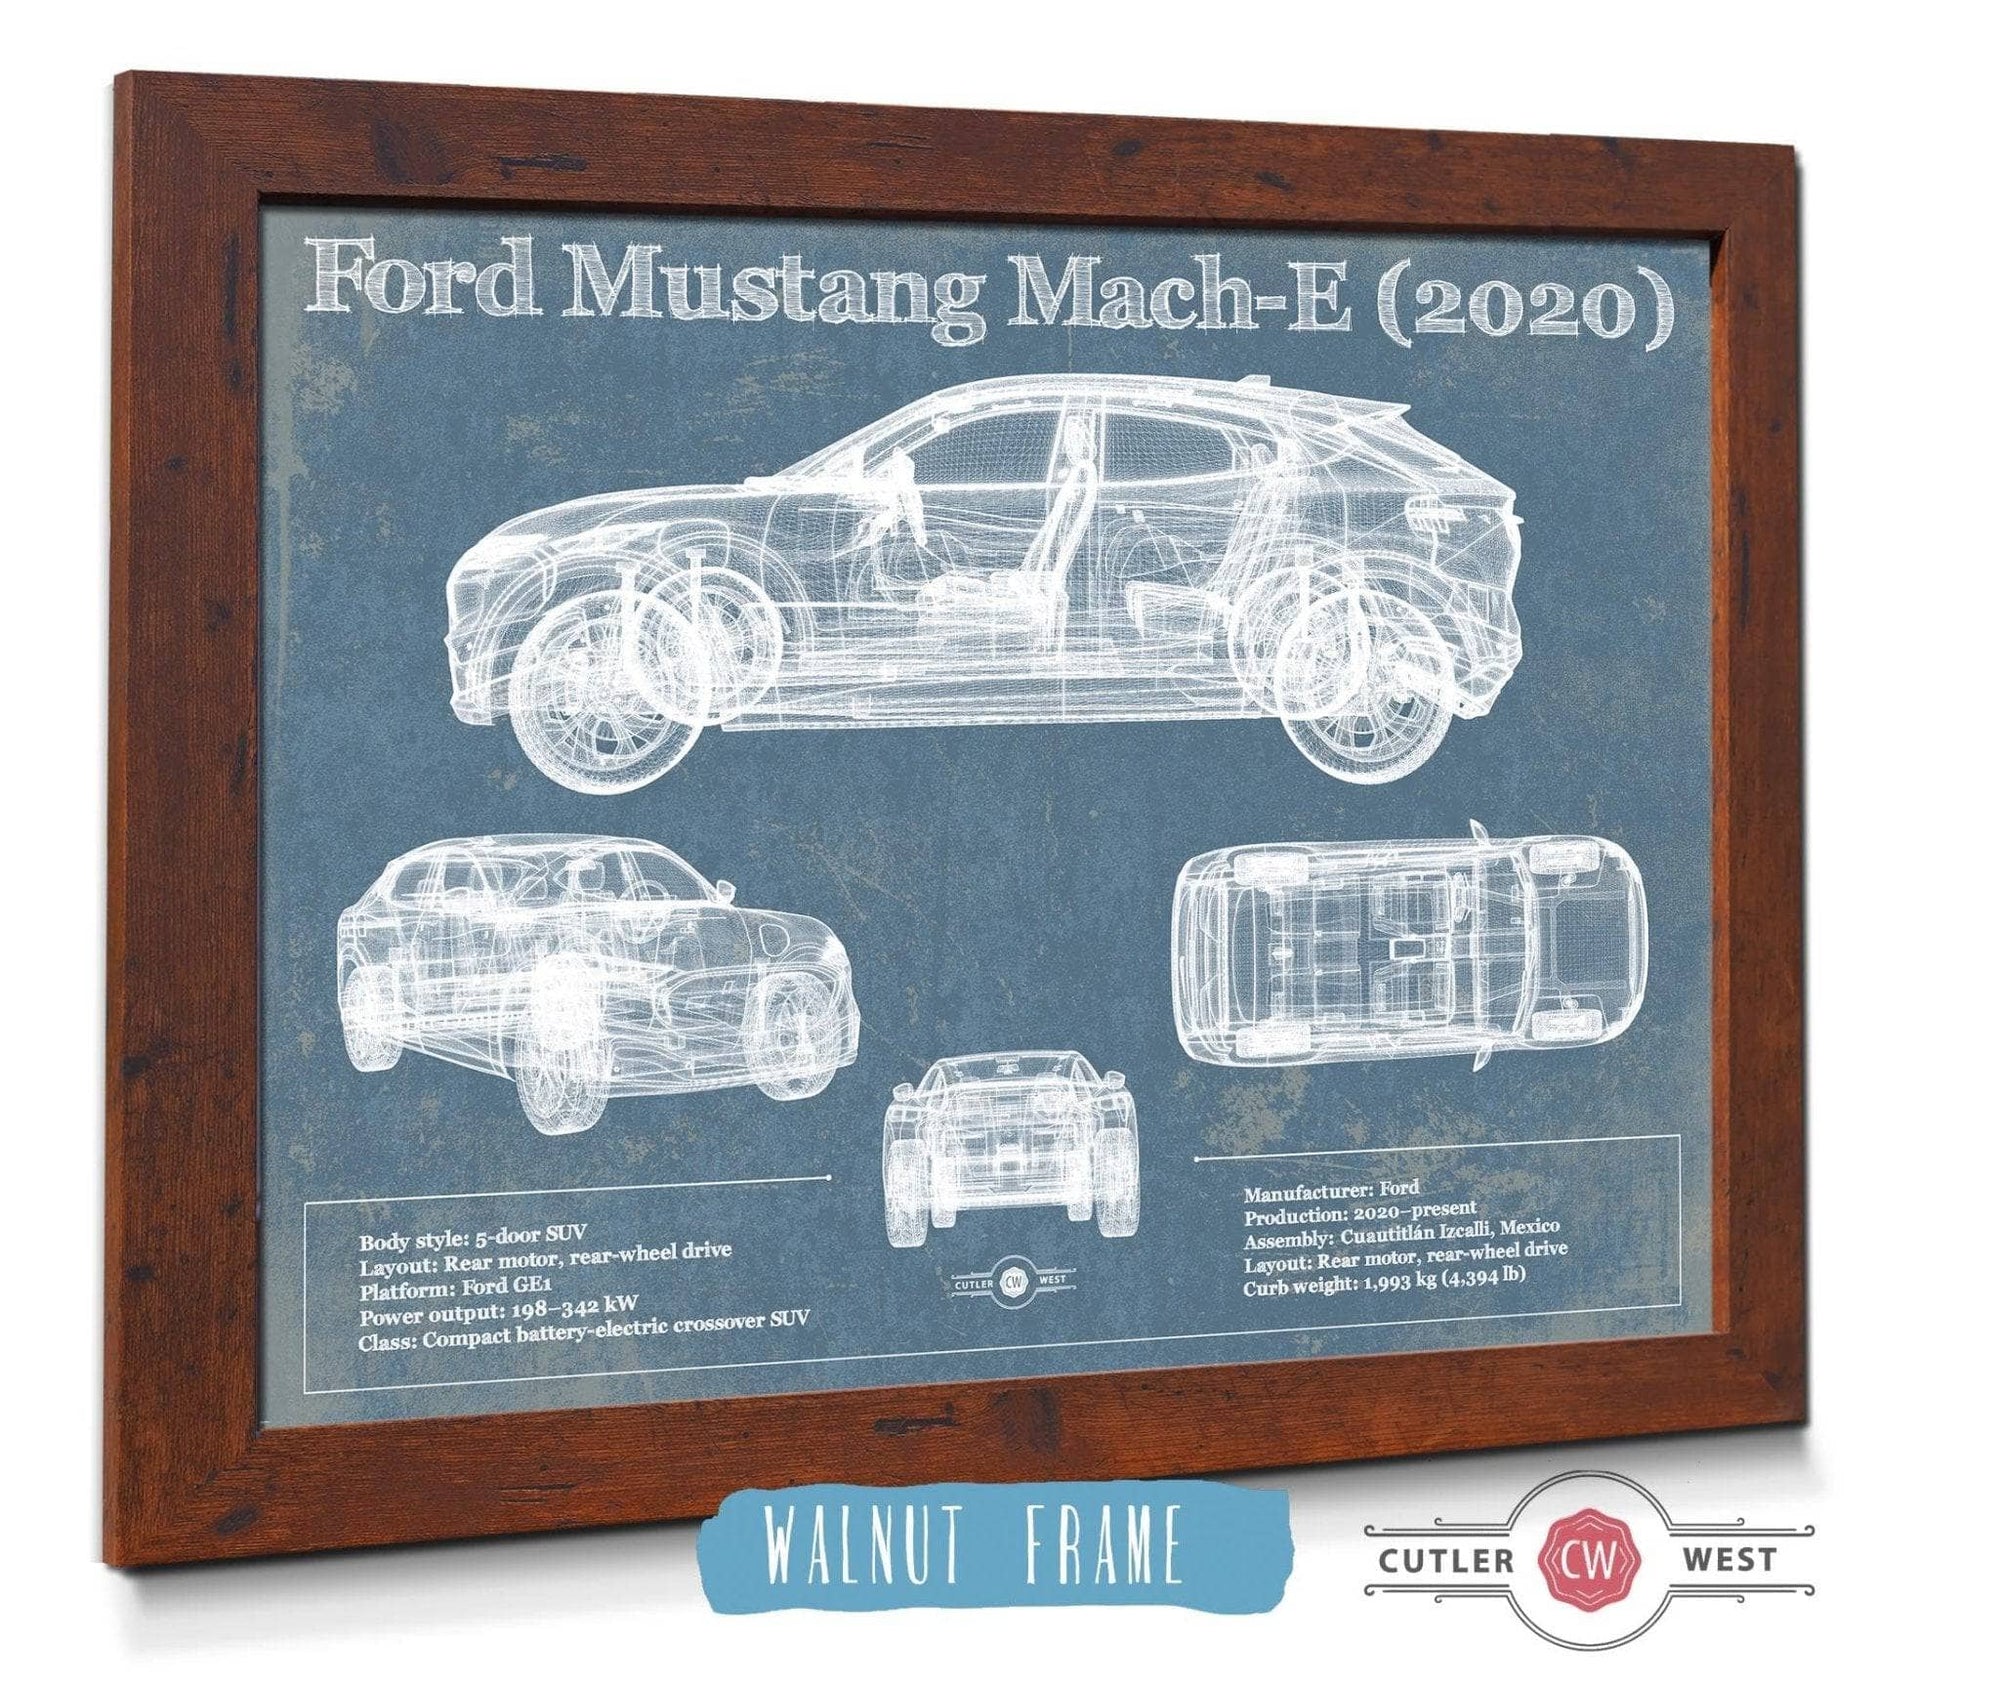 Cutler West Ford Collection 14" x 11" / Walnut Frame Ford Mustang Mach-E 2020 Blueprint Vintage Auto Print 890461895_11675